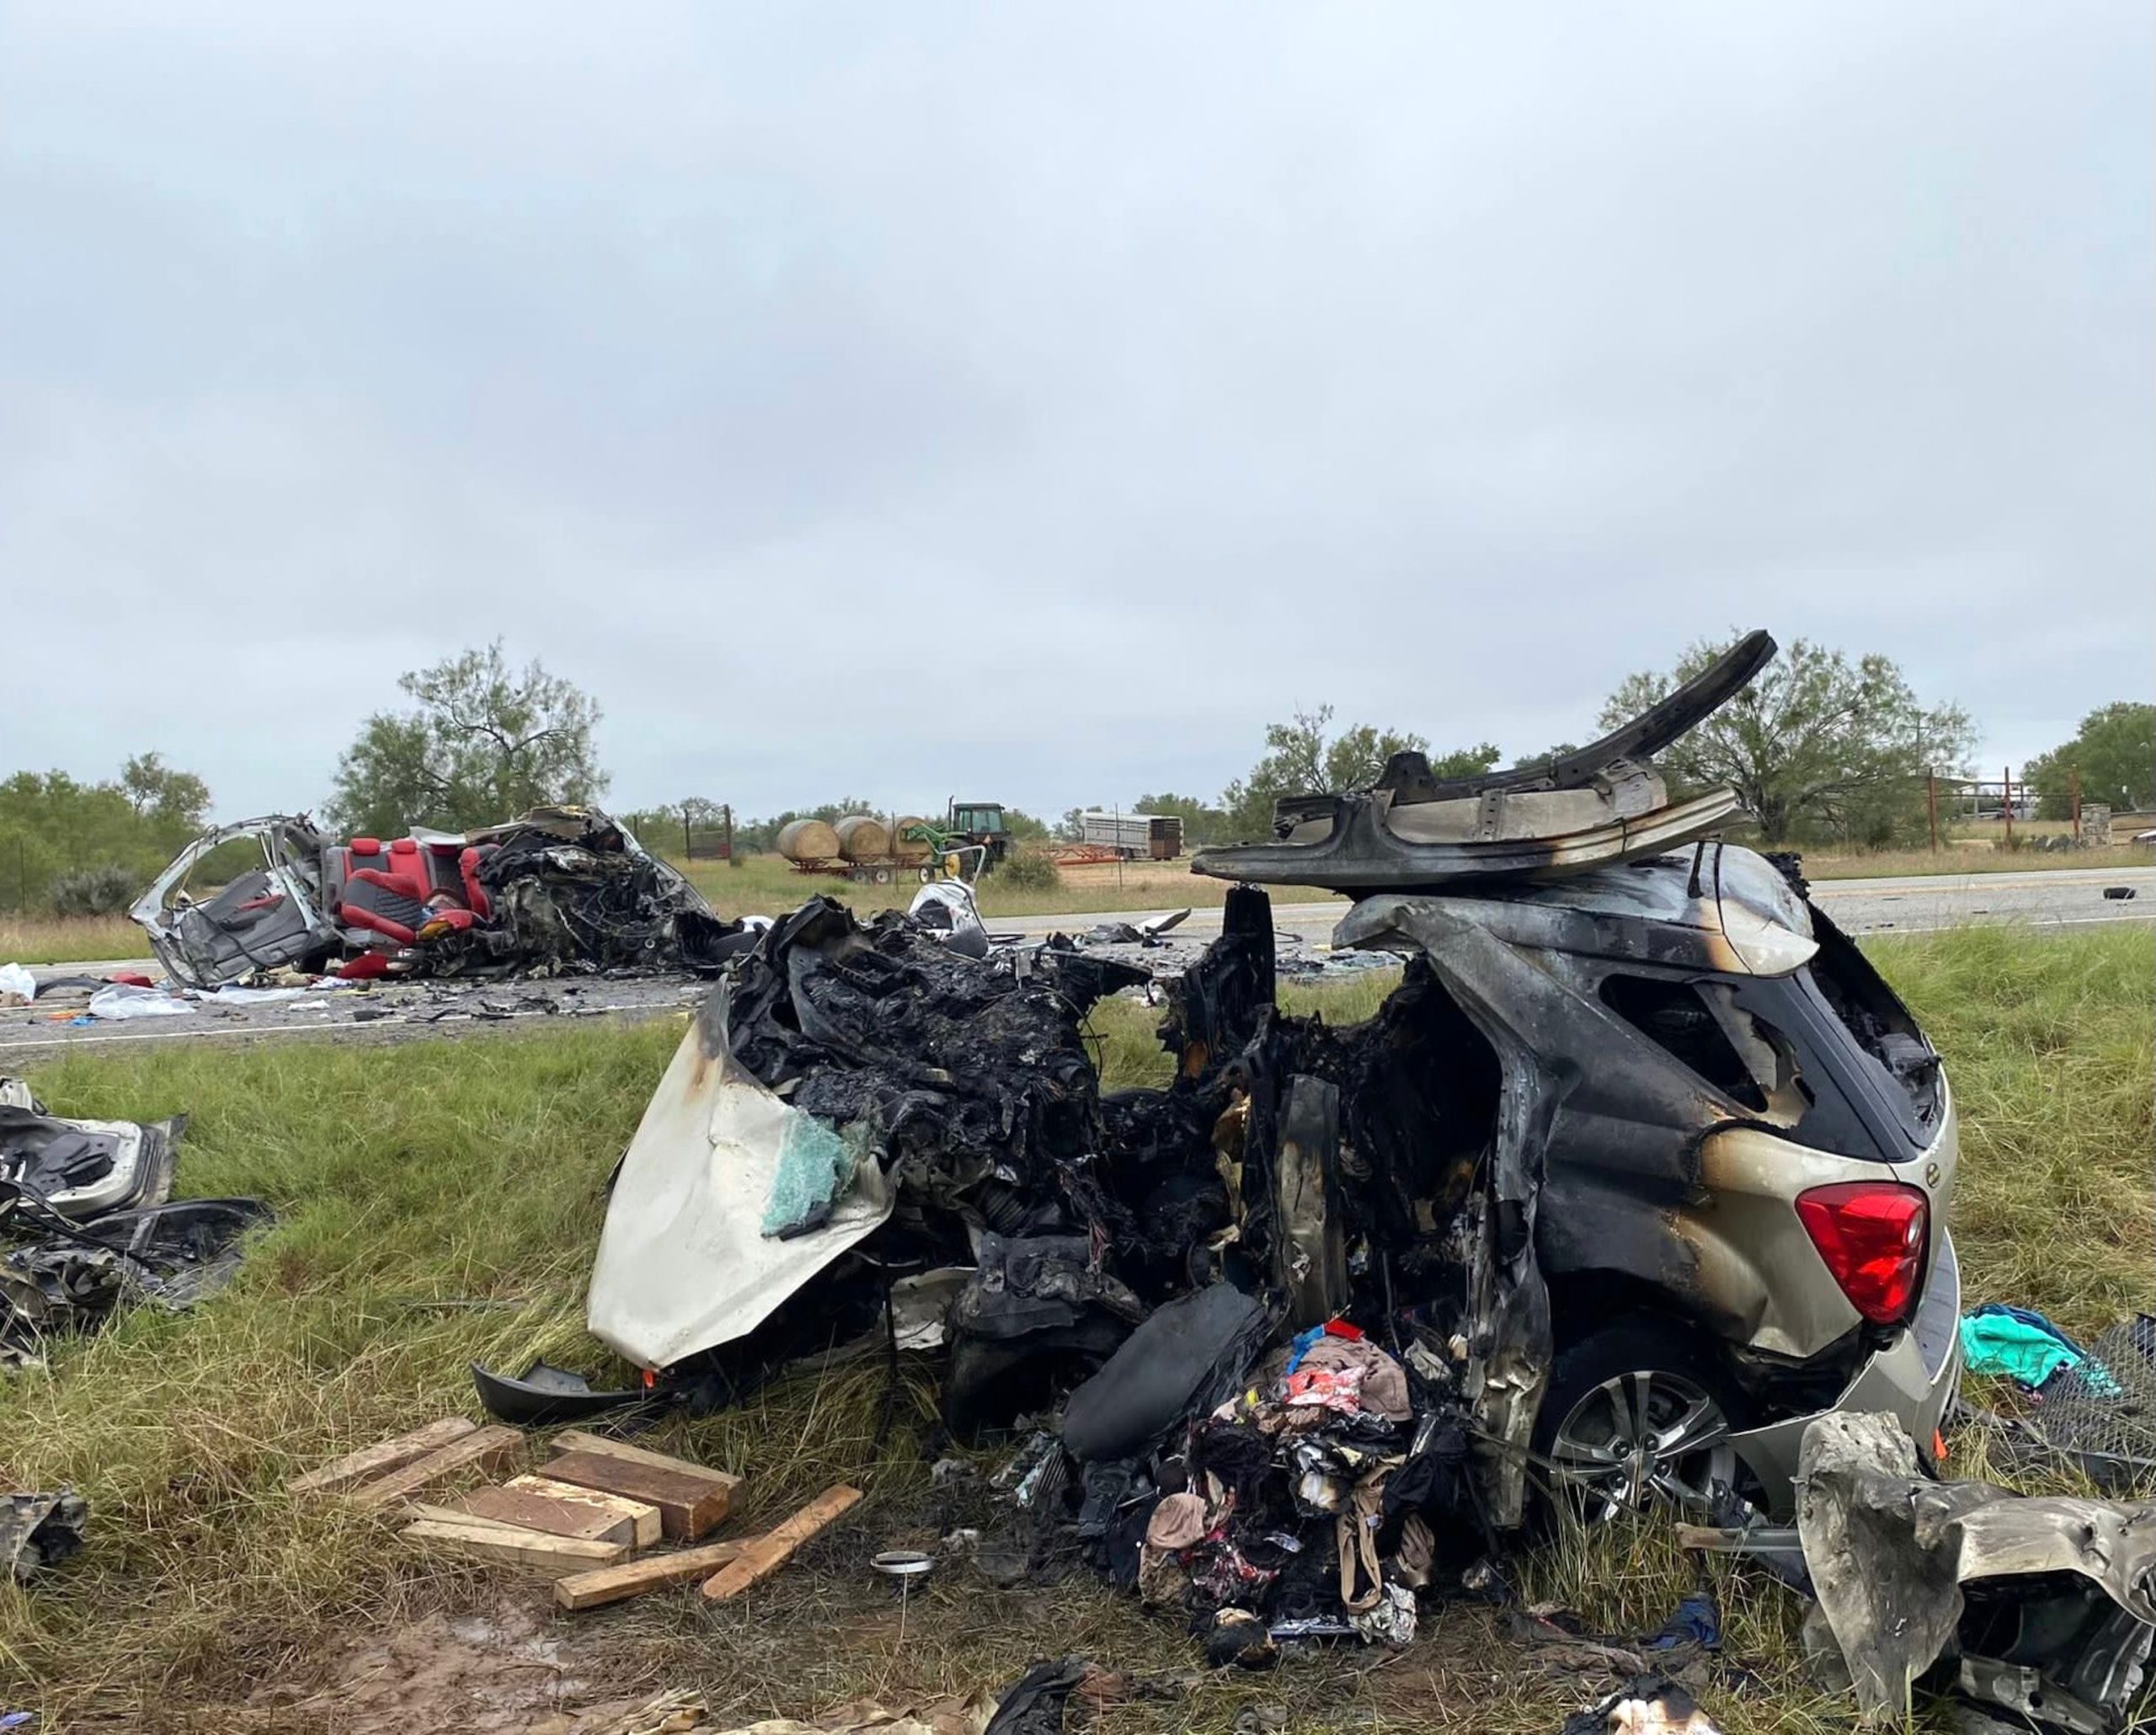 Texas DPS reports 7 fatalities in head-on collision involving vehicle suspected of migrant smuggling